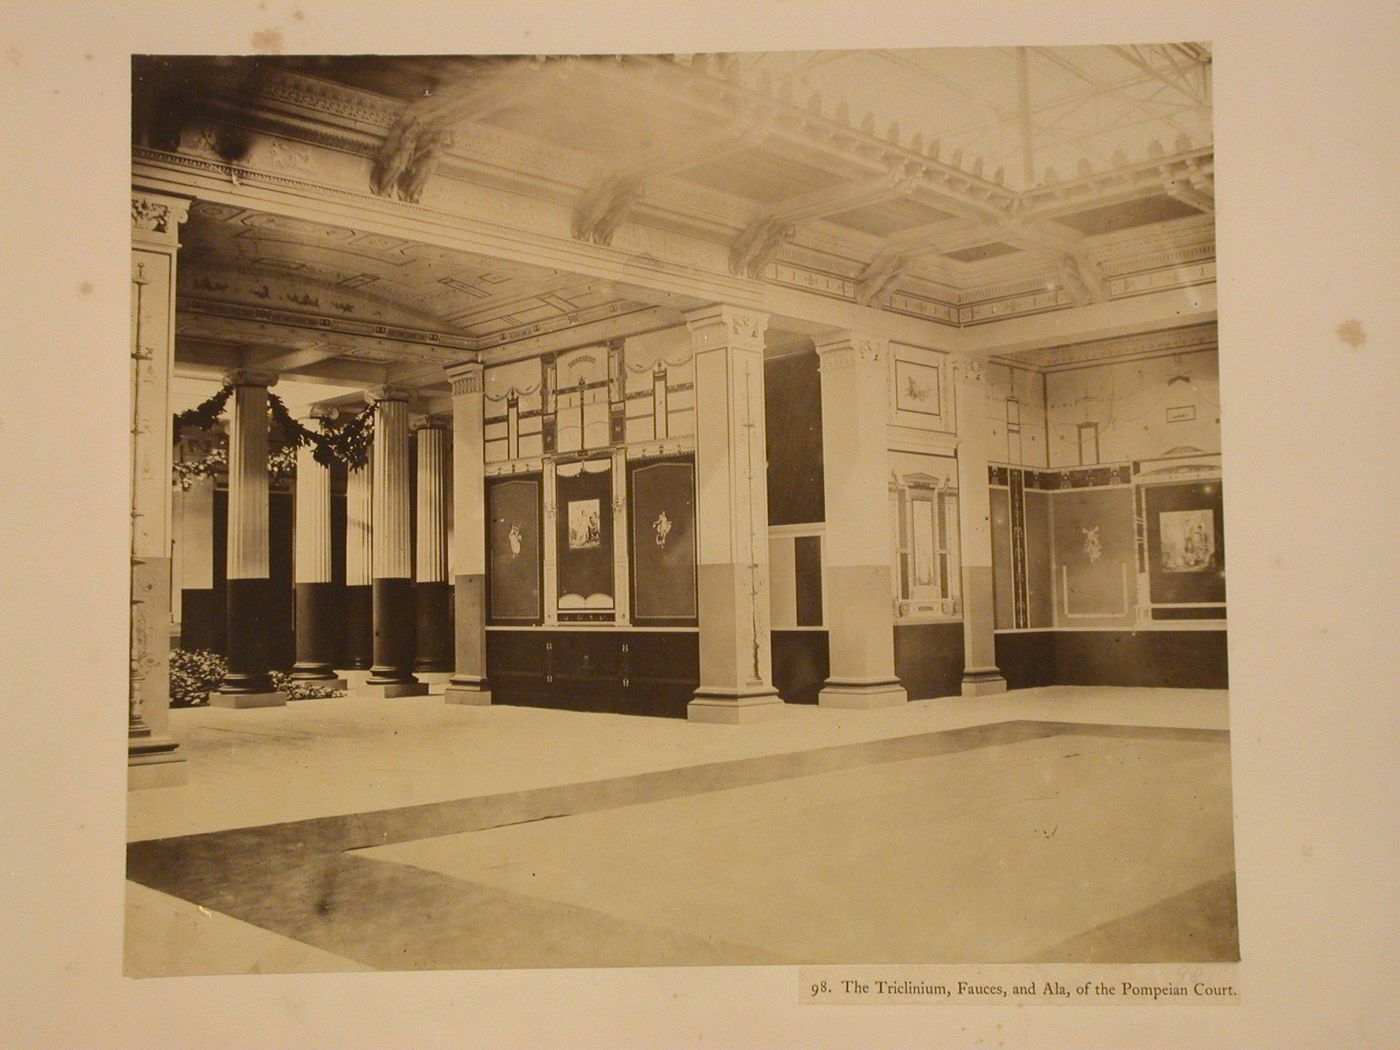 The Triclinium, Fauces, and Ala, of the Pompeian Court, Crystal Palace, Sydenham, England